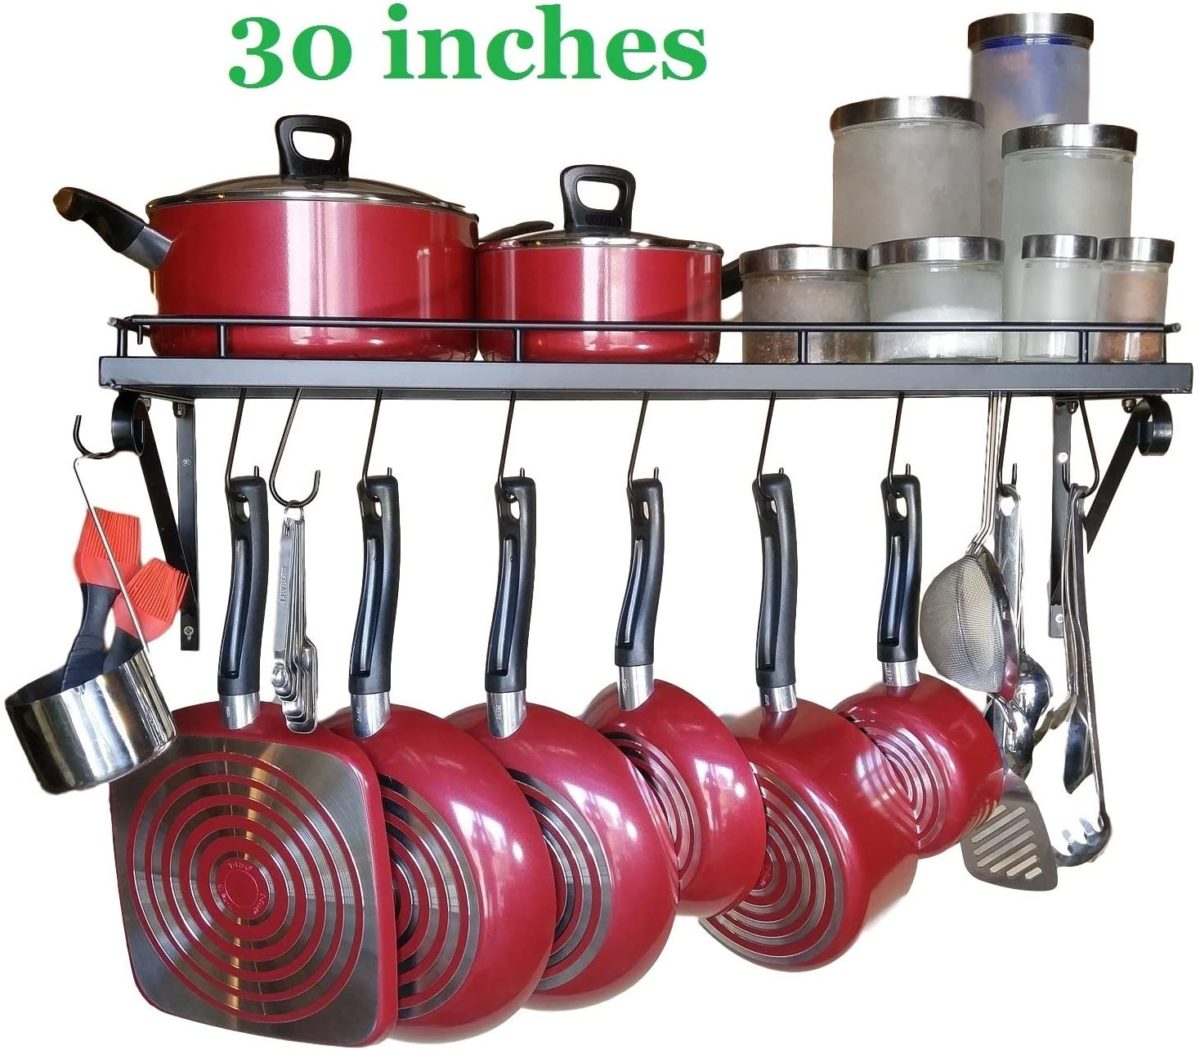 Wall-mounted pots and pans rack